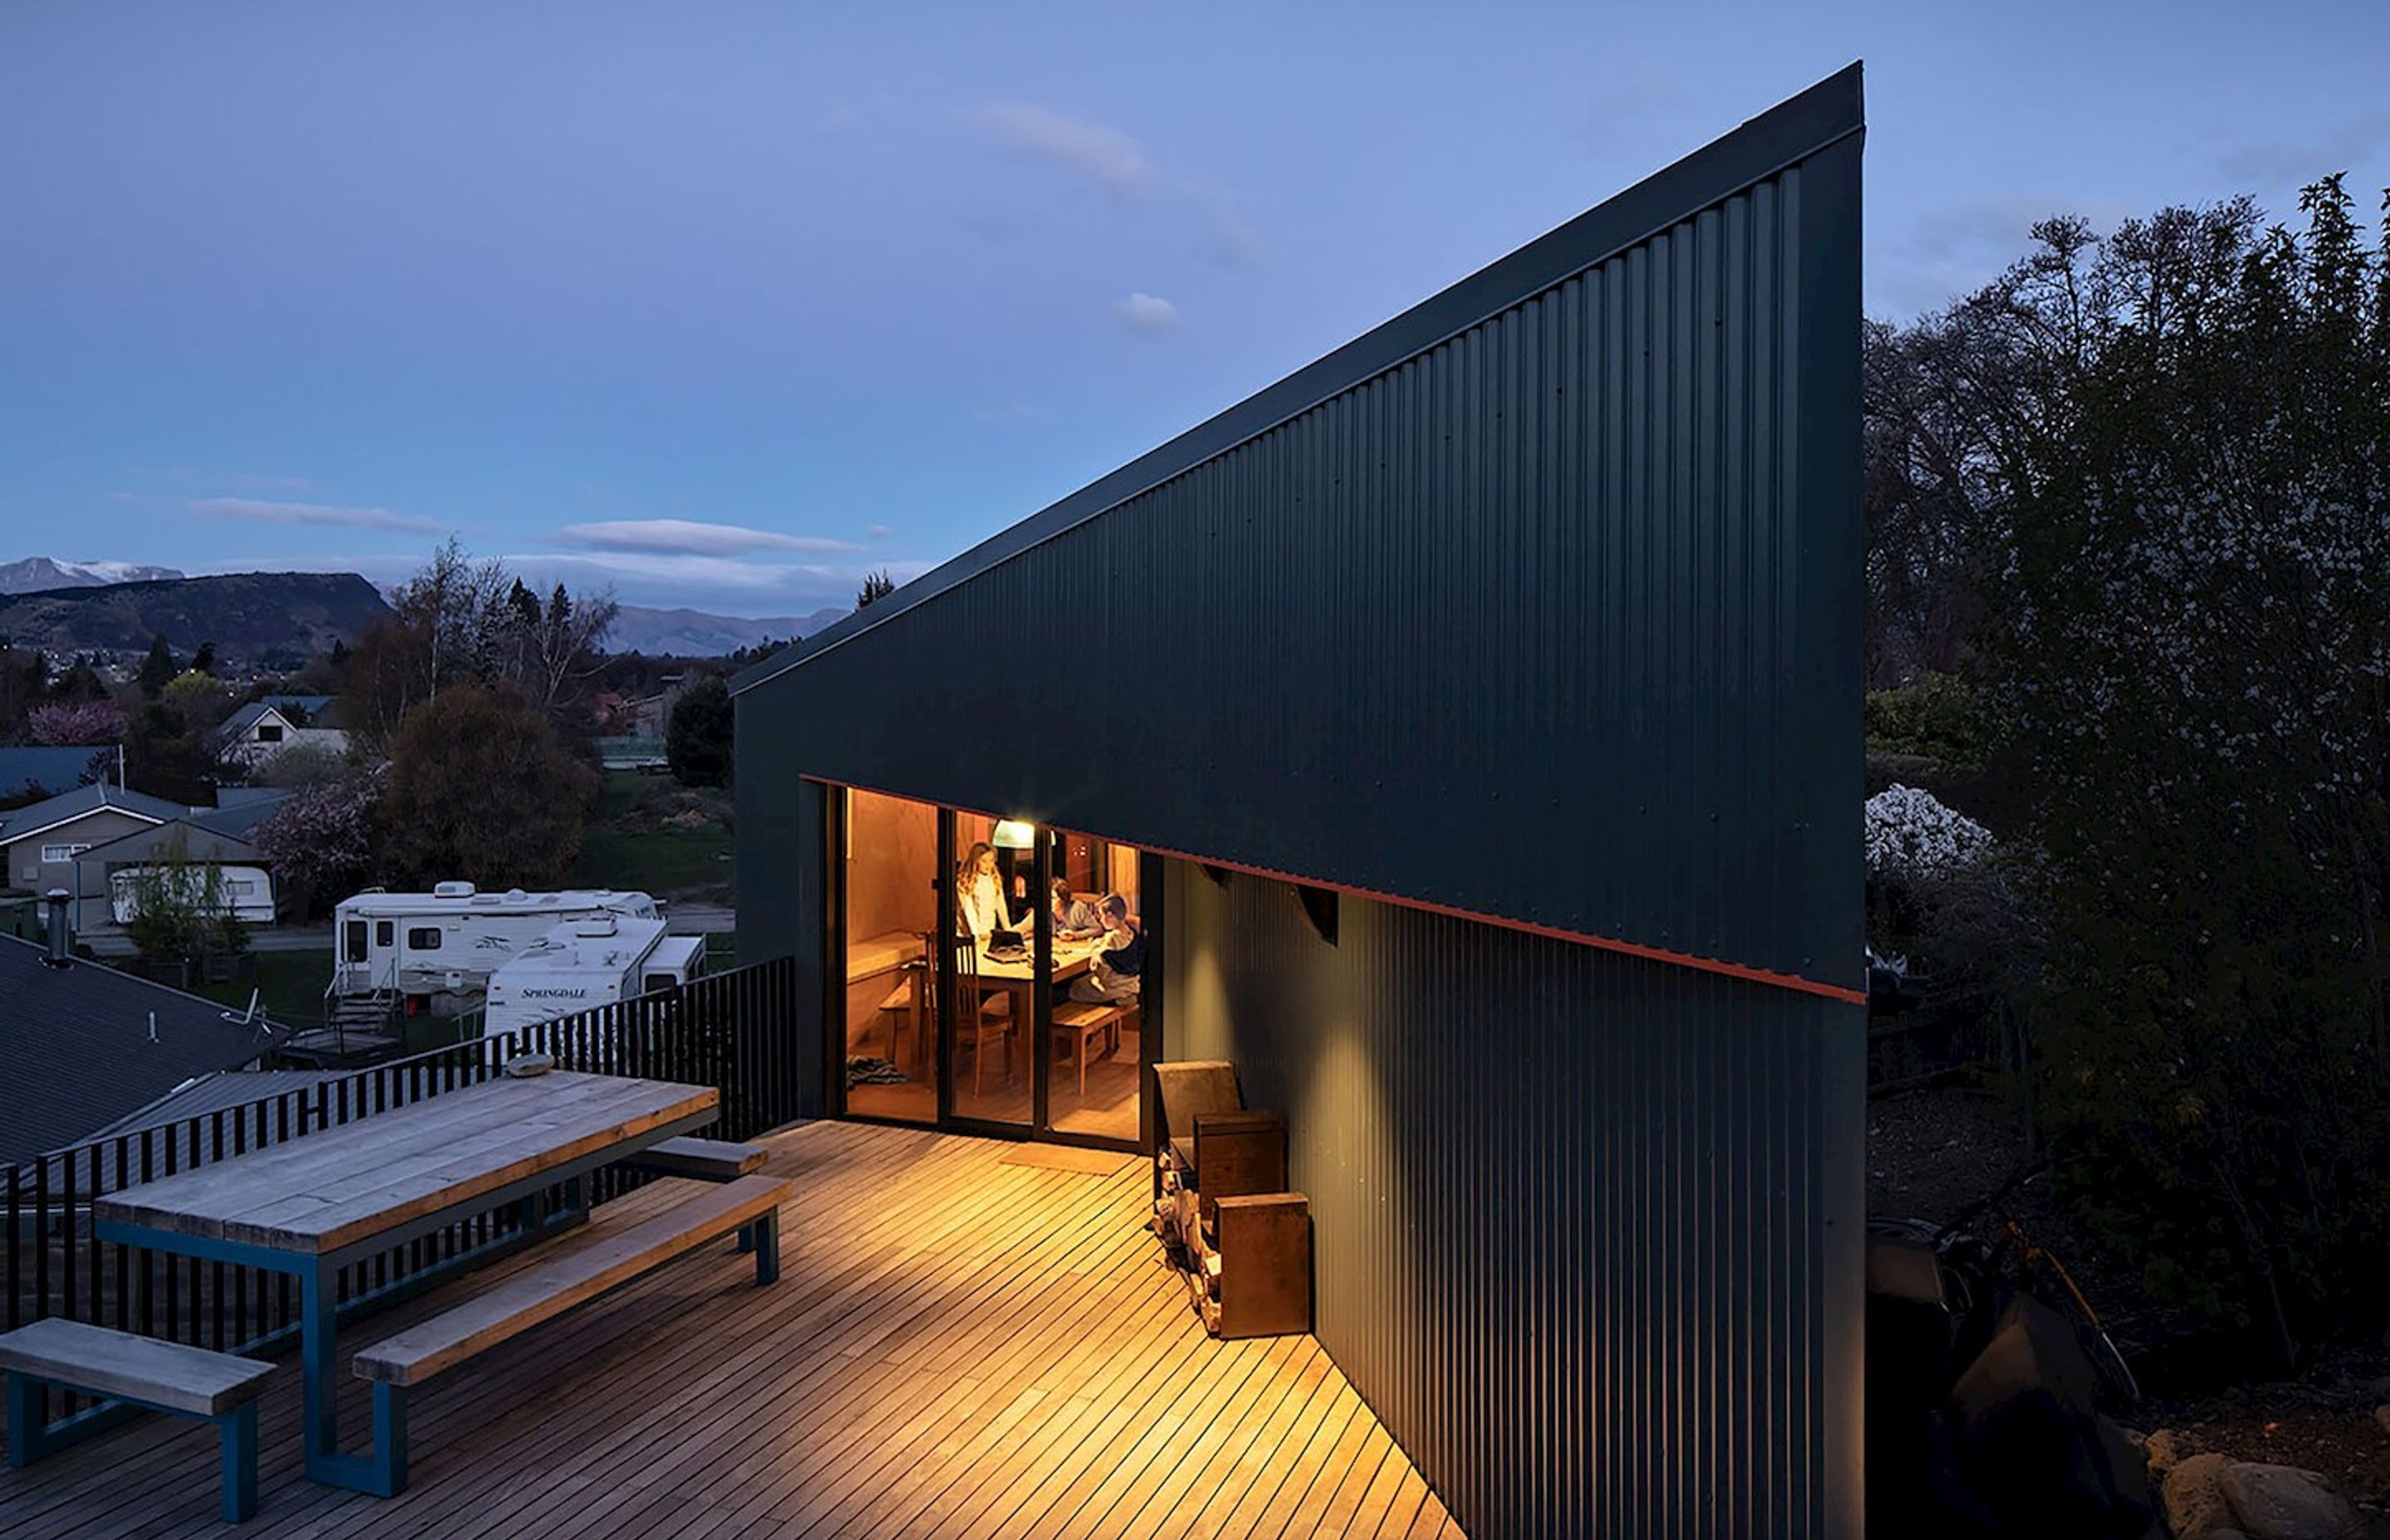 The shape and form of the house is defined by the steep slope and a neighbour's drainage easement under the decking.